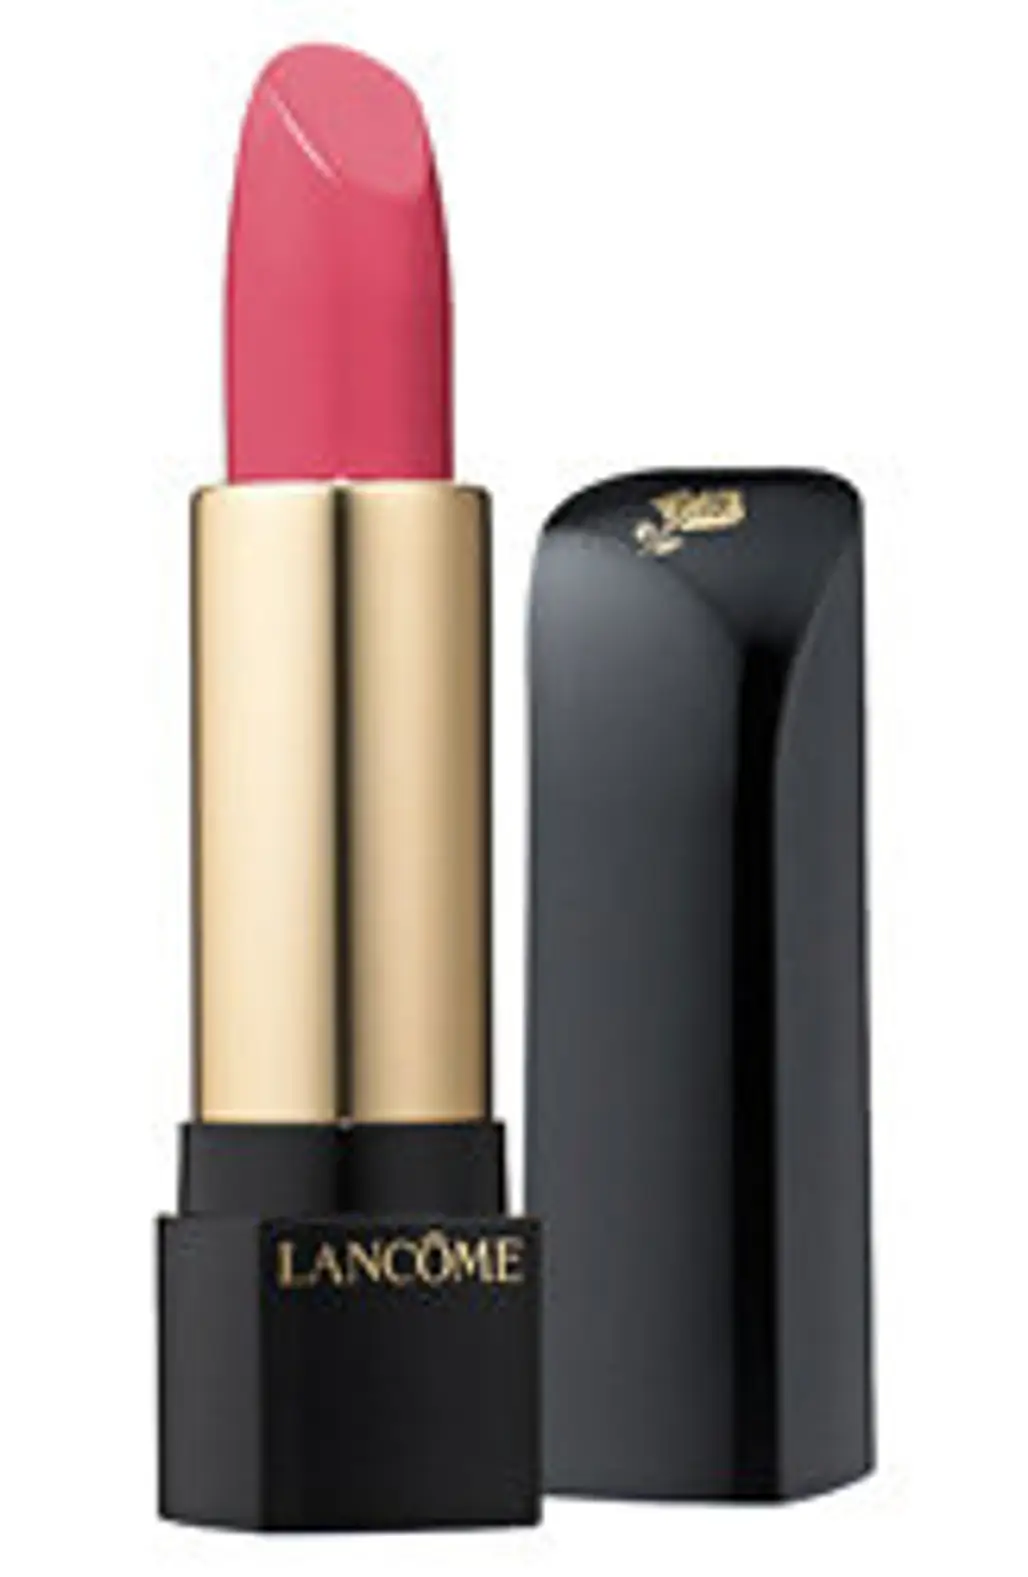 Lancome L’Absolu Ultra Lavende Rouge in Daisy Rose